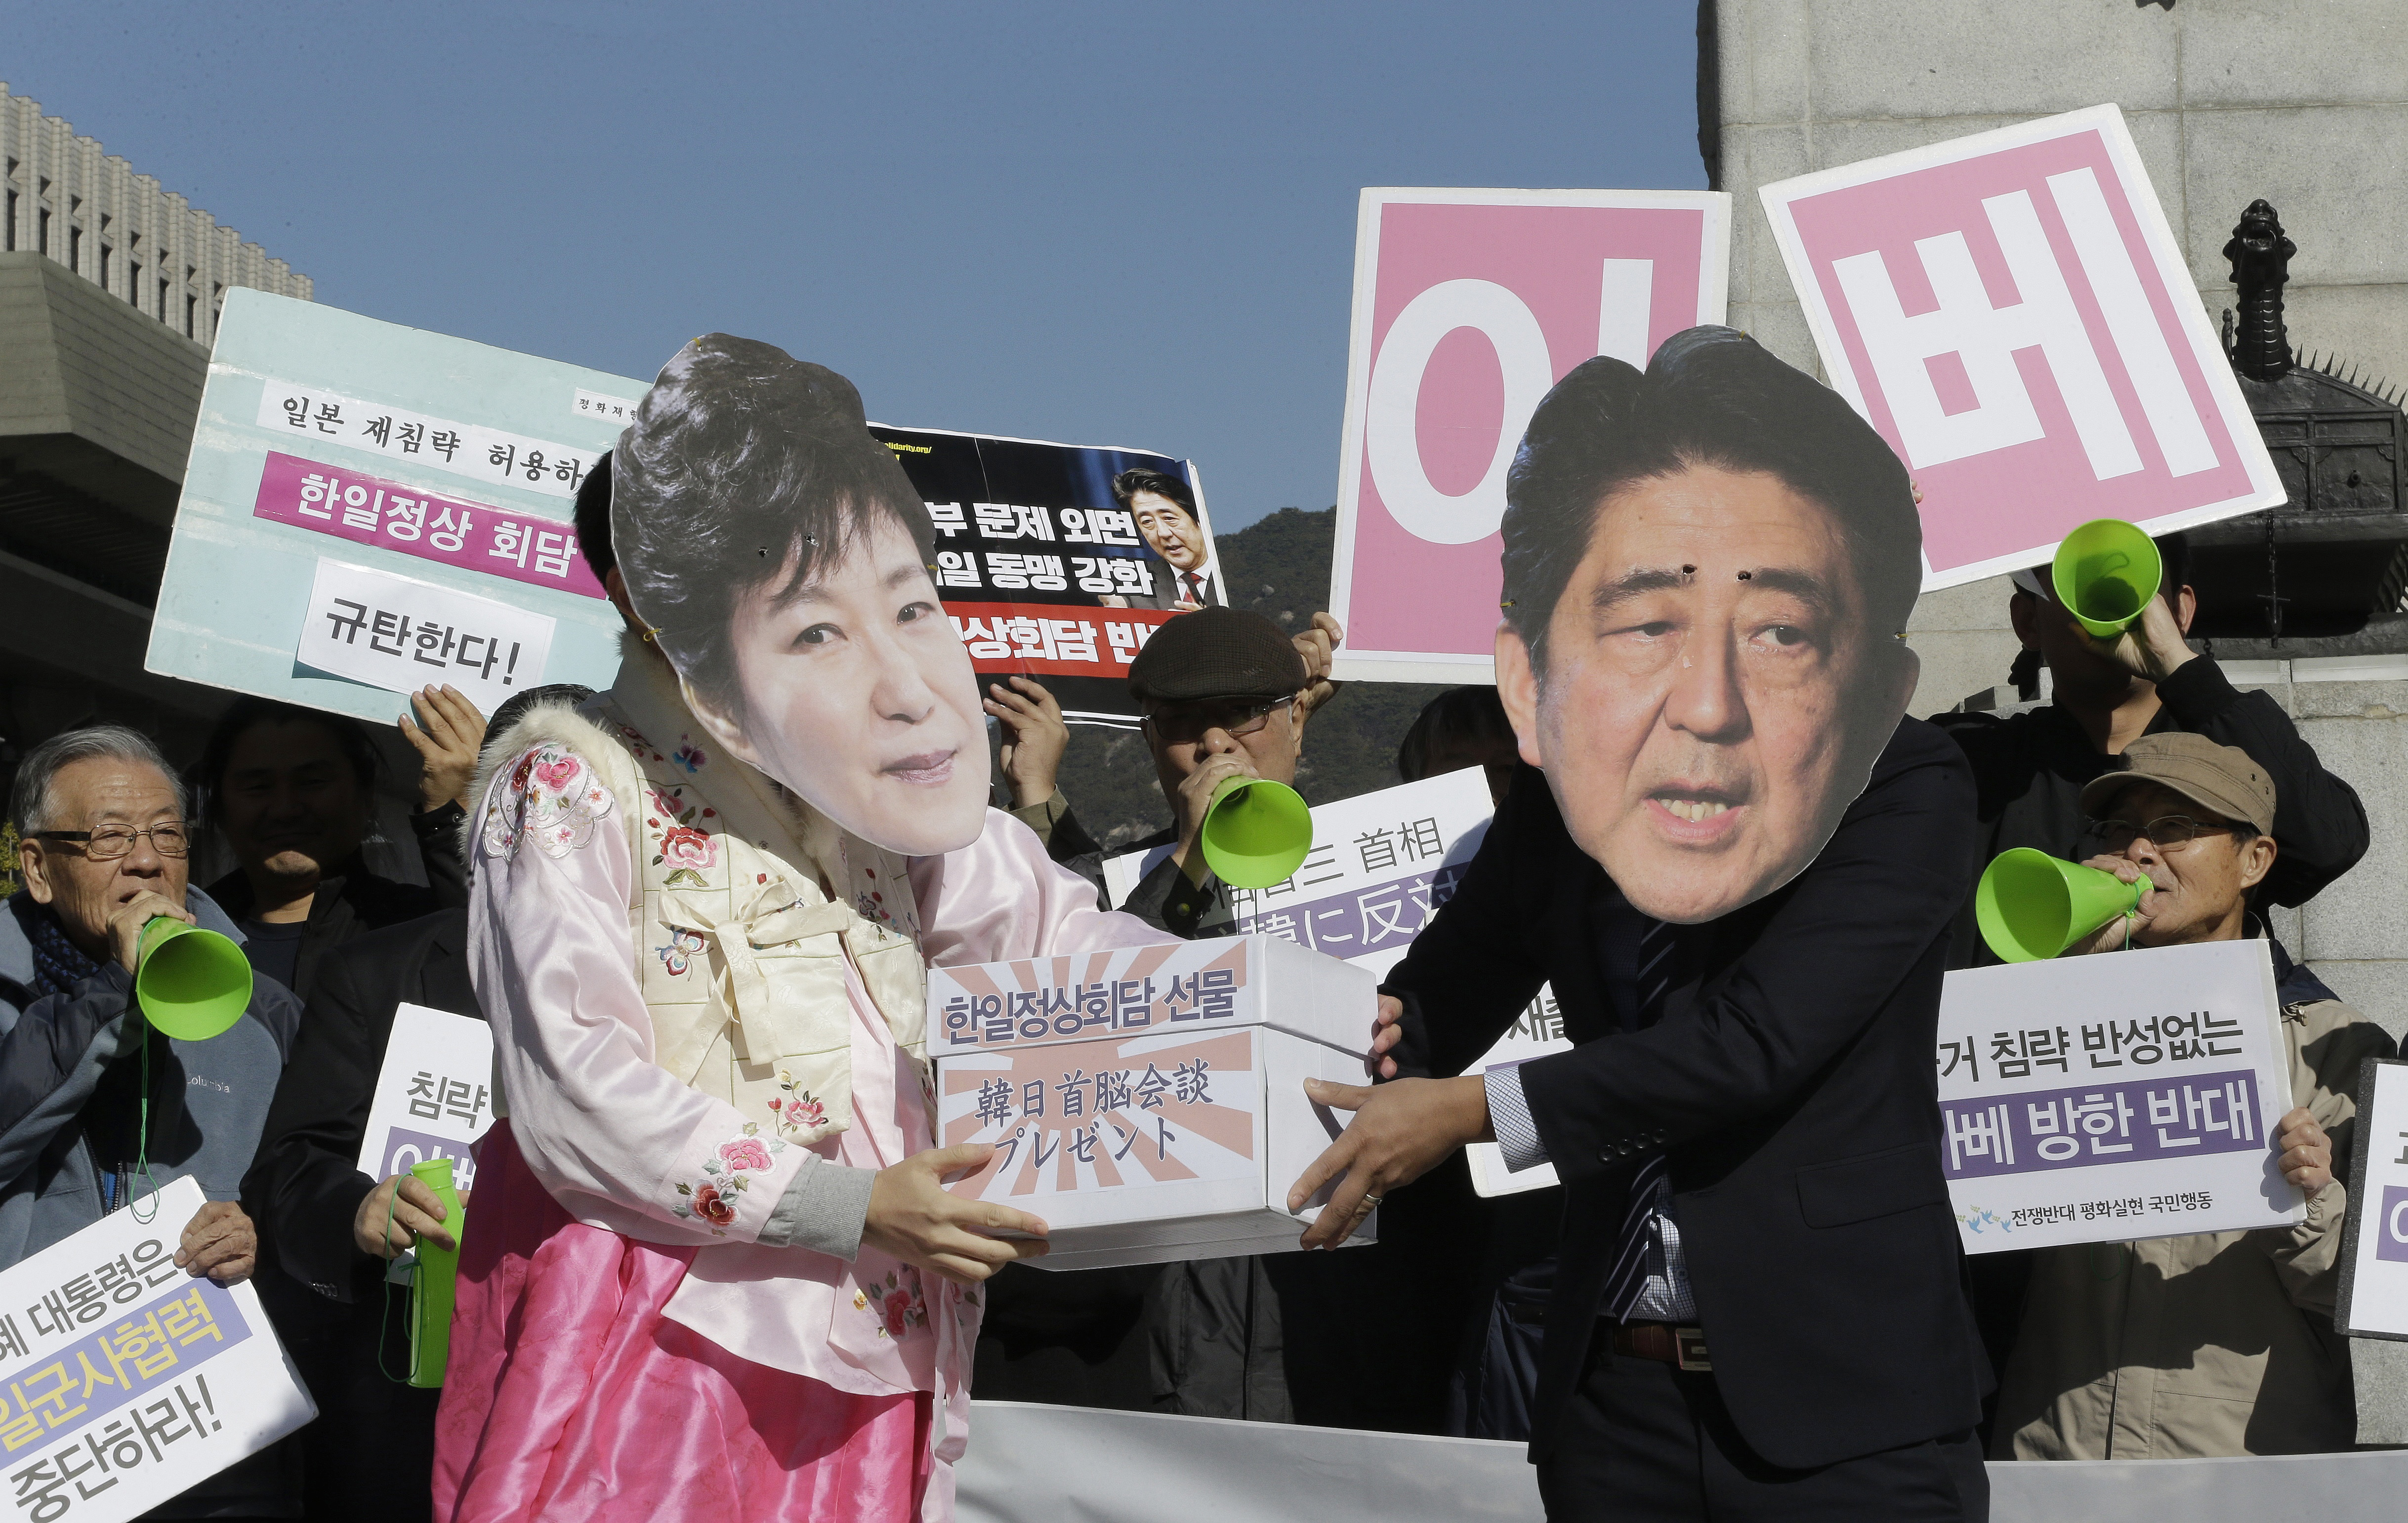 Protesters wearing masks of Japanese Prime Minister Shinzo Abe, right, and South Korean President Park Geun-hye stage a rally against Abe's planned visit in Seoul, South Korea, Friday, Oct. 30, 2015. Abe and Chinese Premier Li Keqiang will visit Seoul for their trilateral summit with Park. The letters on the cards read "Oppose Abe's visit." (AP Photo/Ahn Young-joon)